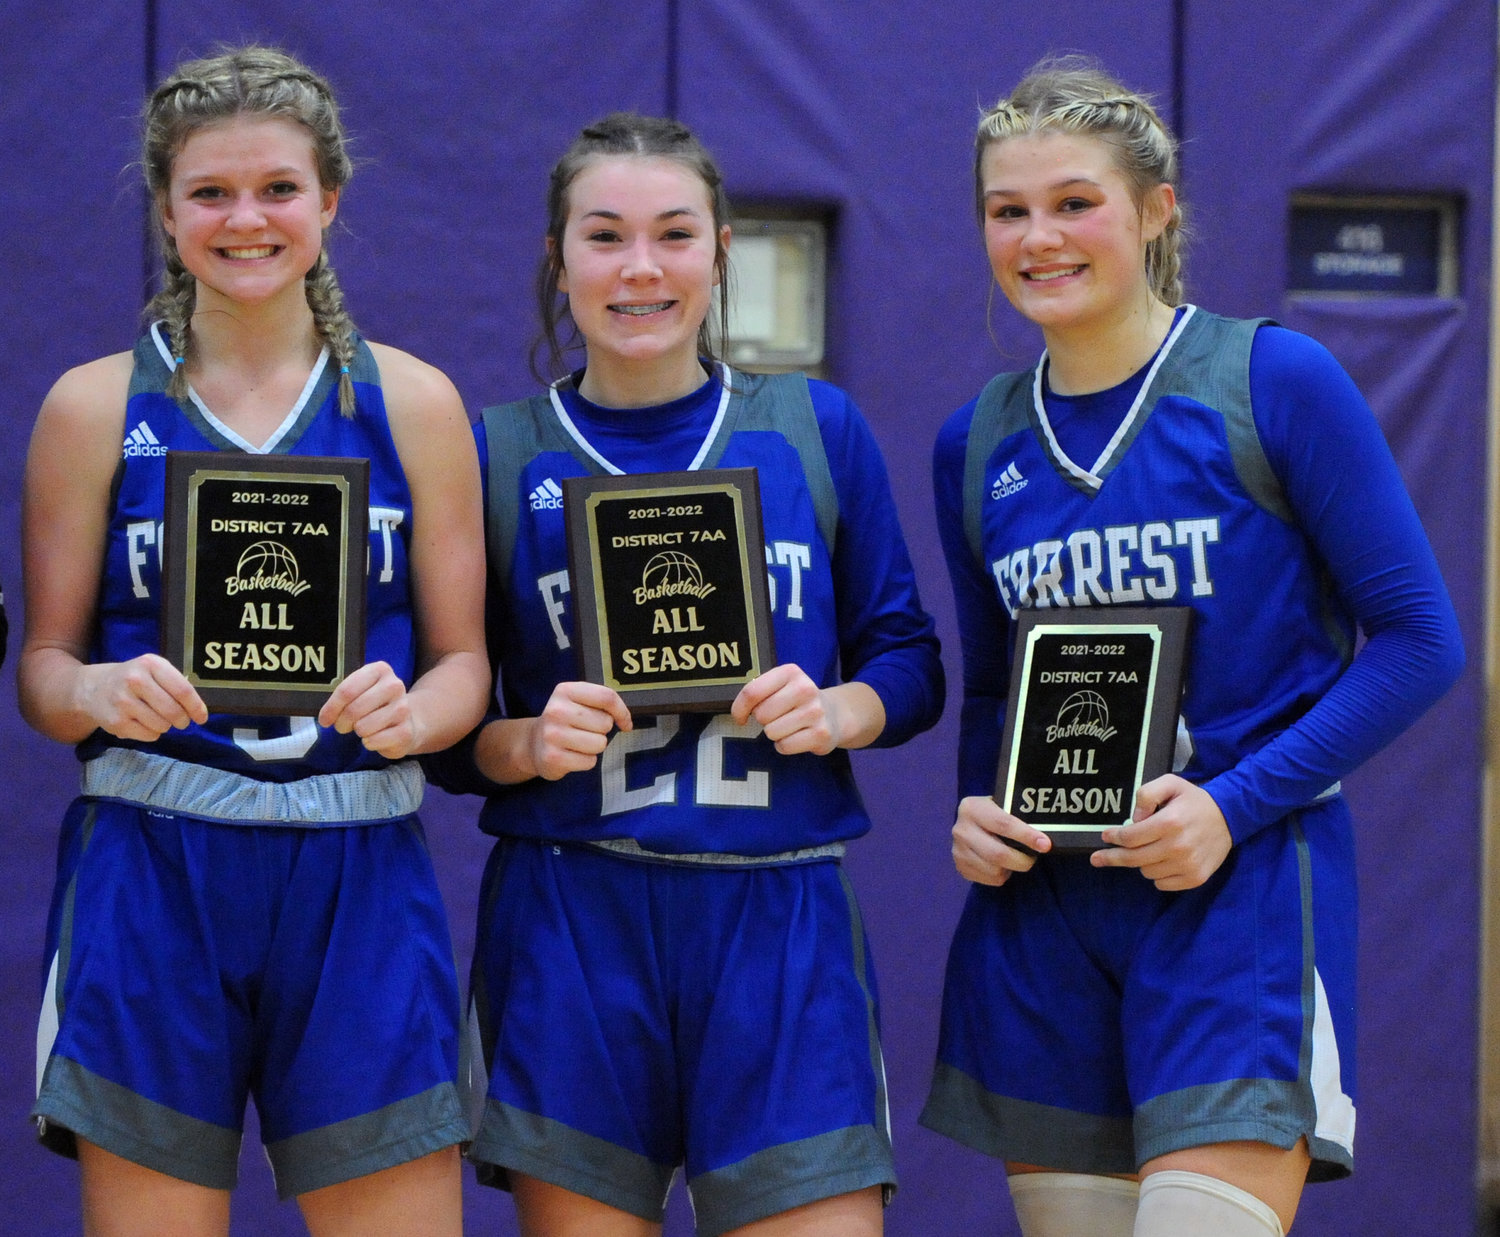 For their efforts in the 2021-2022 regular season, three Lady Rockets earned regular season All-District recognition. Macyn Kirby (right), Addison Bunty (middle) and Kinslee Inlow were named to the all-district team.